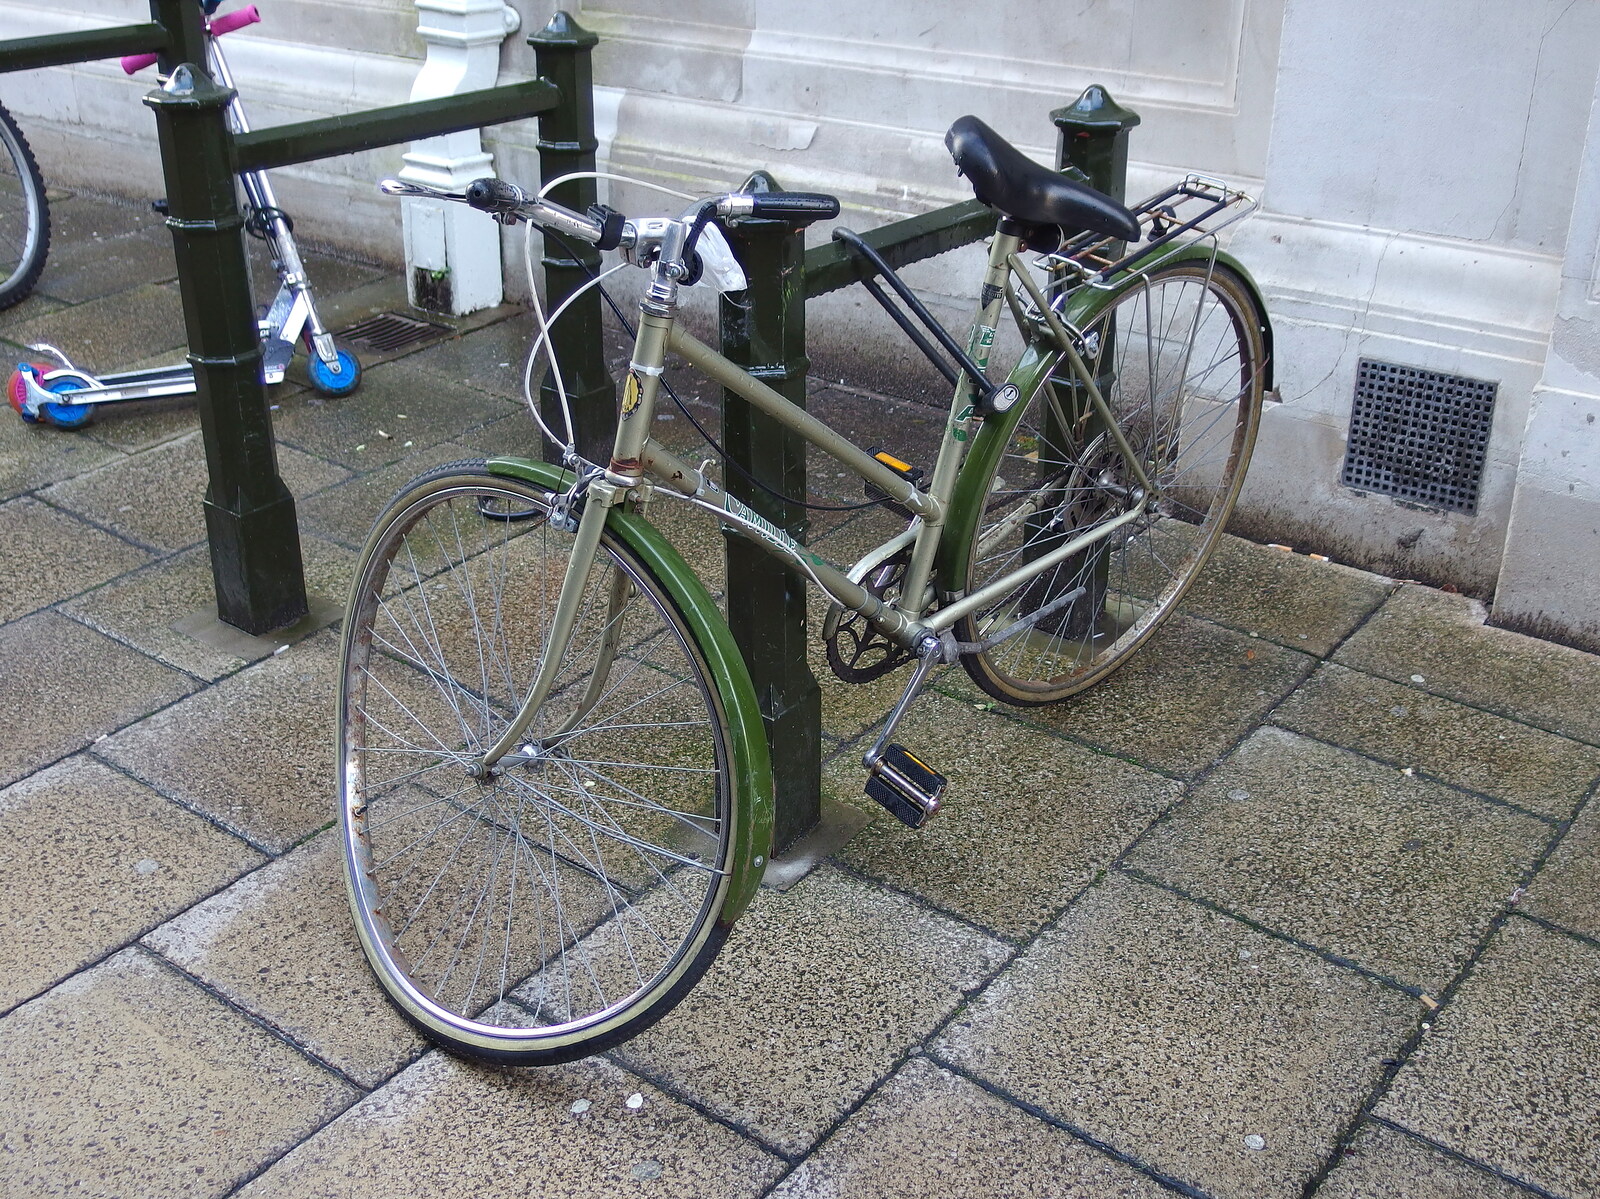 A bicycle - Cambridge style from A Dragoney Sort of Day, Norwich, Norfolk - 15th February 2014